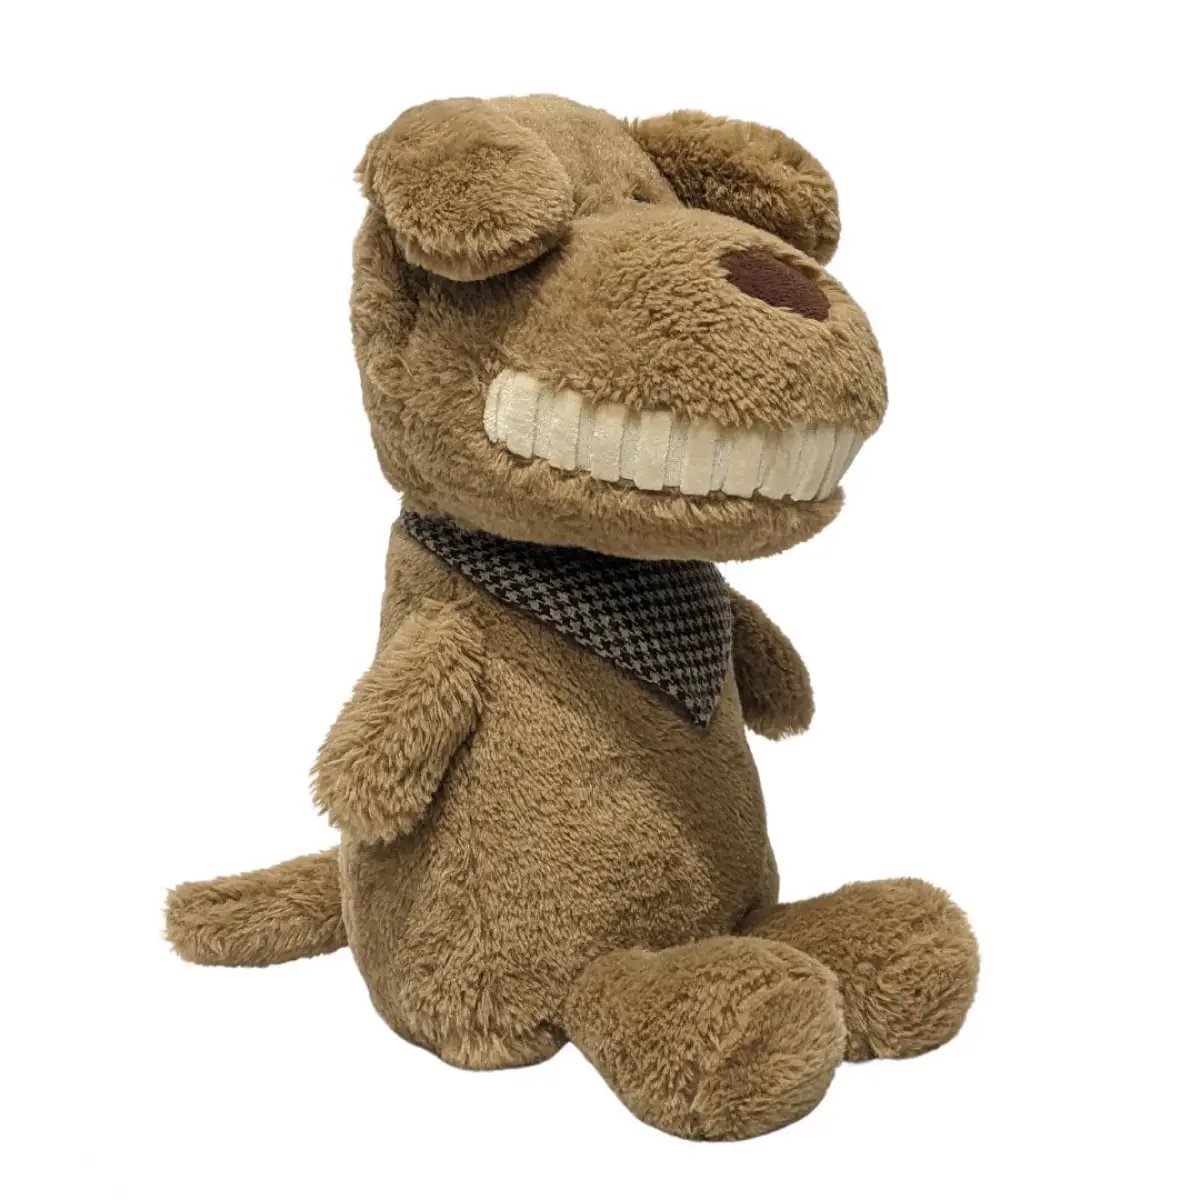 Cheeky Dog Huggable Cuddly Stuffed Toy By Fuzzbuzz, Soft Toys for Kids, Cute Plushies Brown, For Kids Of Age 2 Years & Above